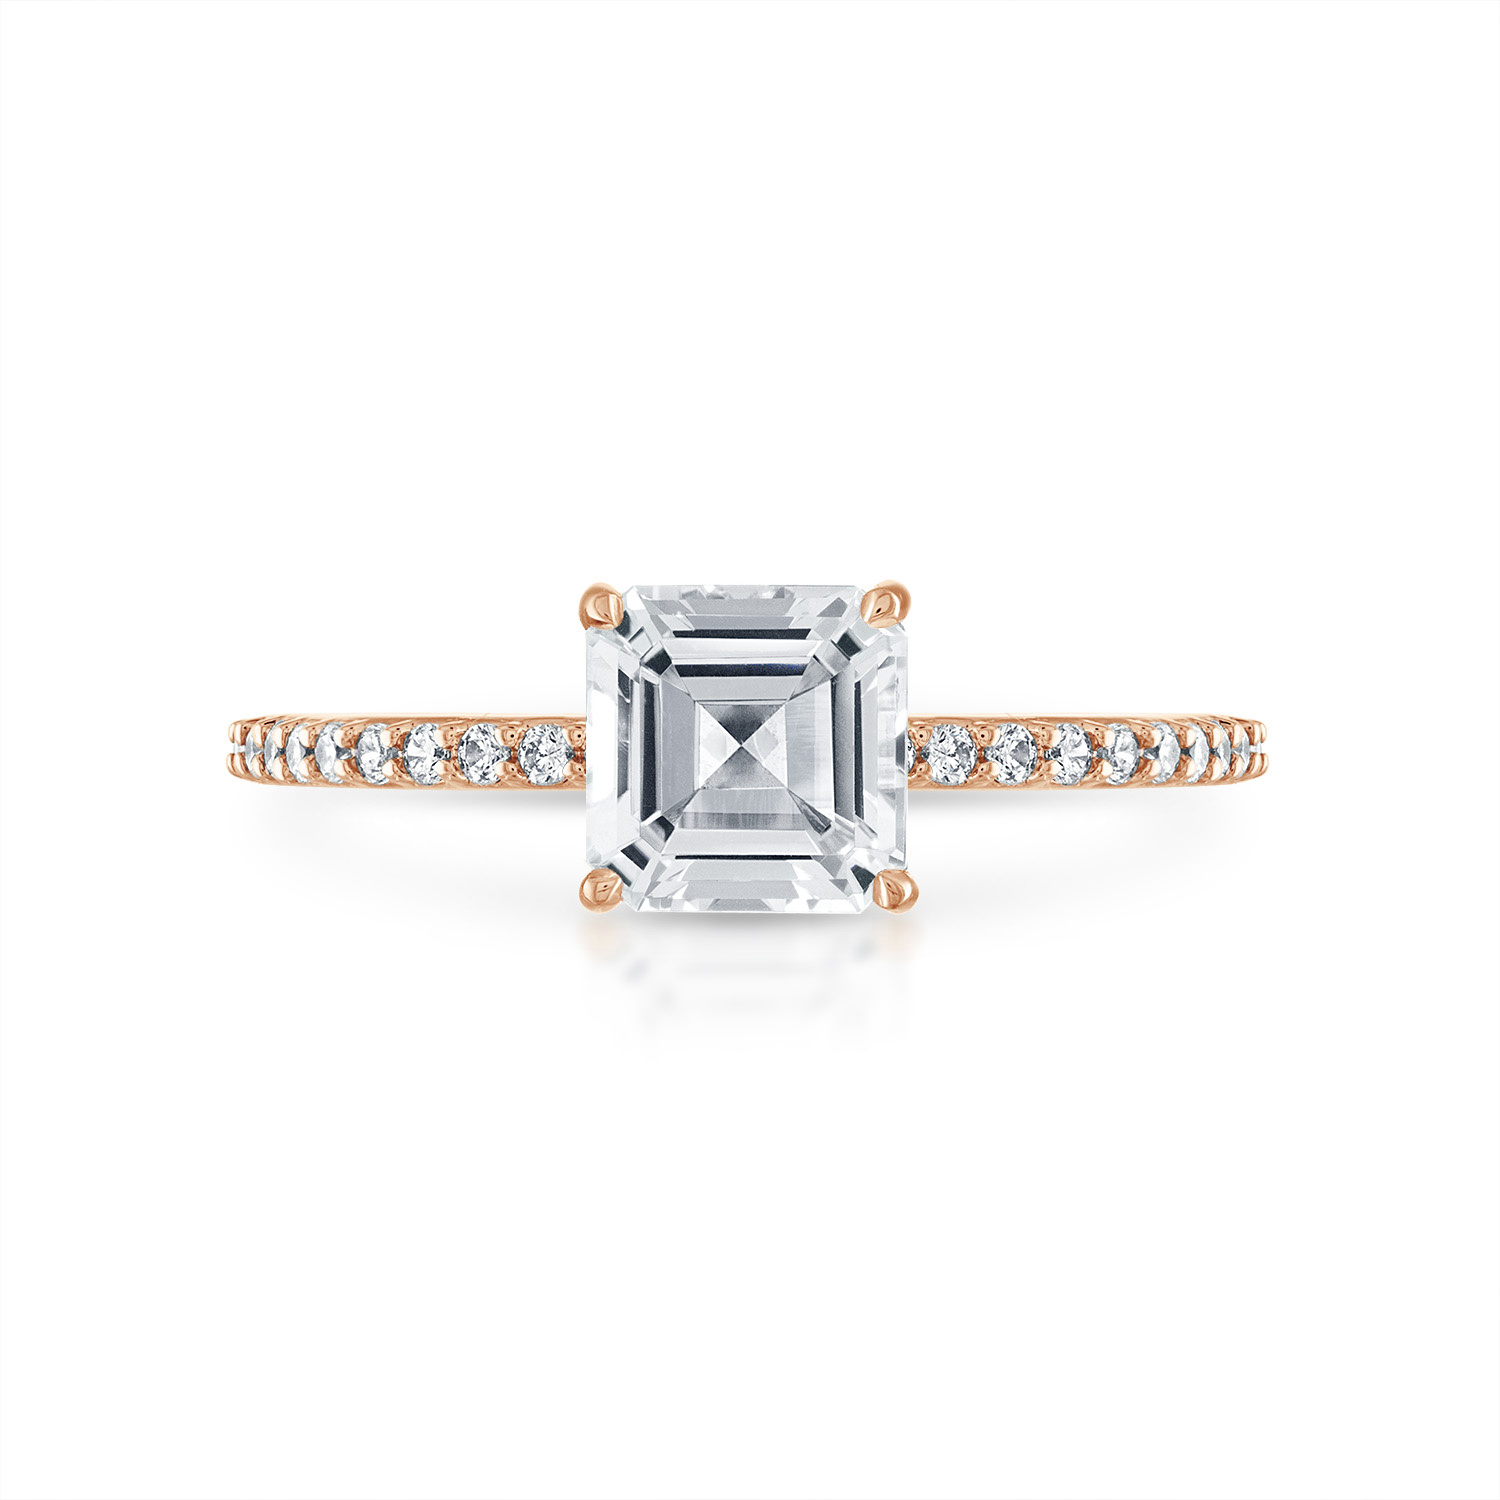 Asscher Pave with Pave Underbezel Engagement Ring in Rose Gold